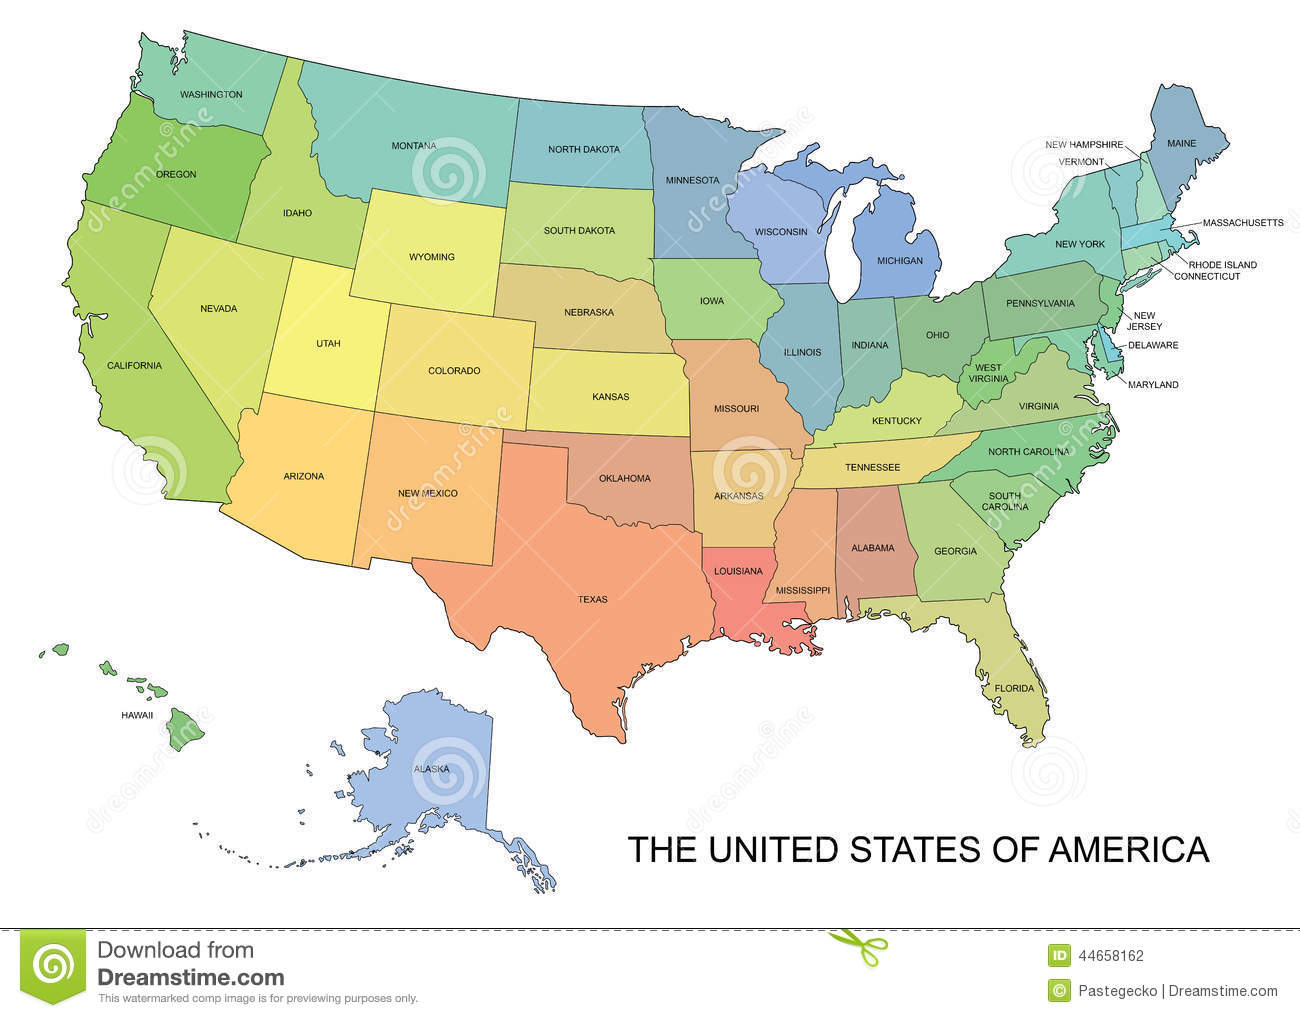 Color-Coded United States Map with States